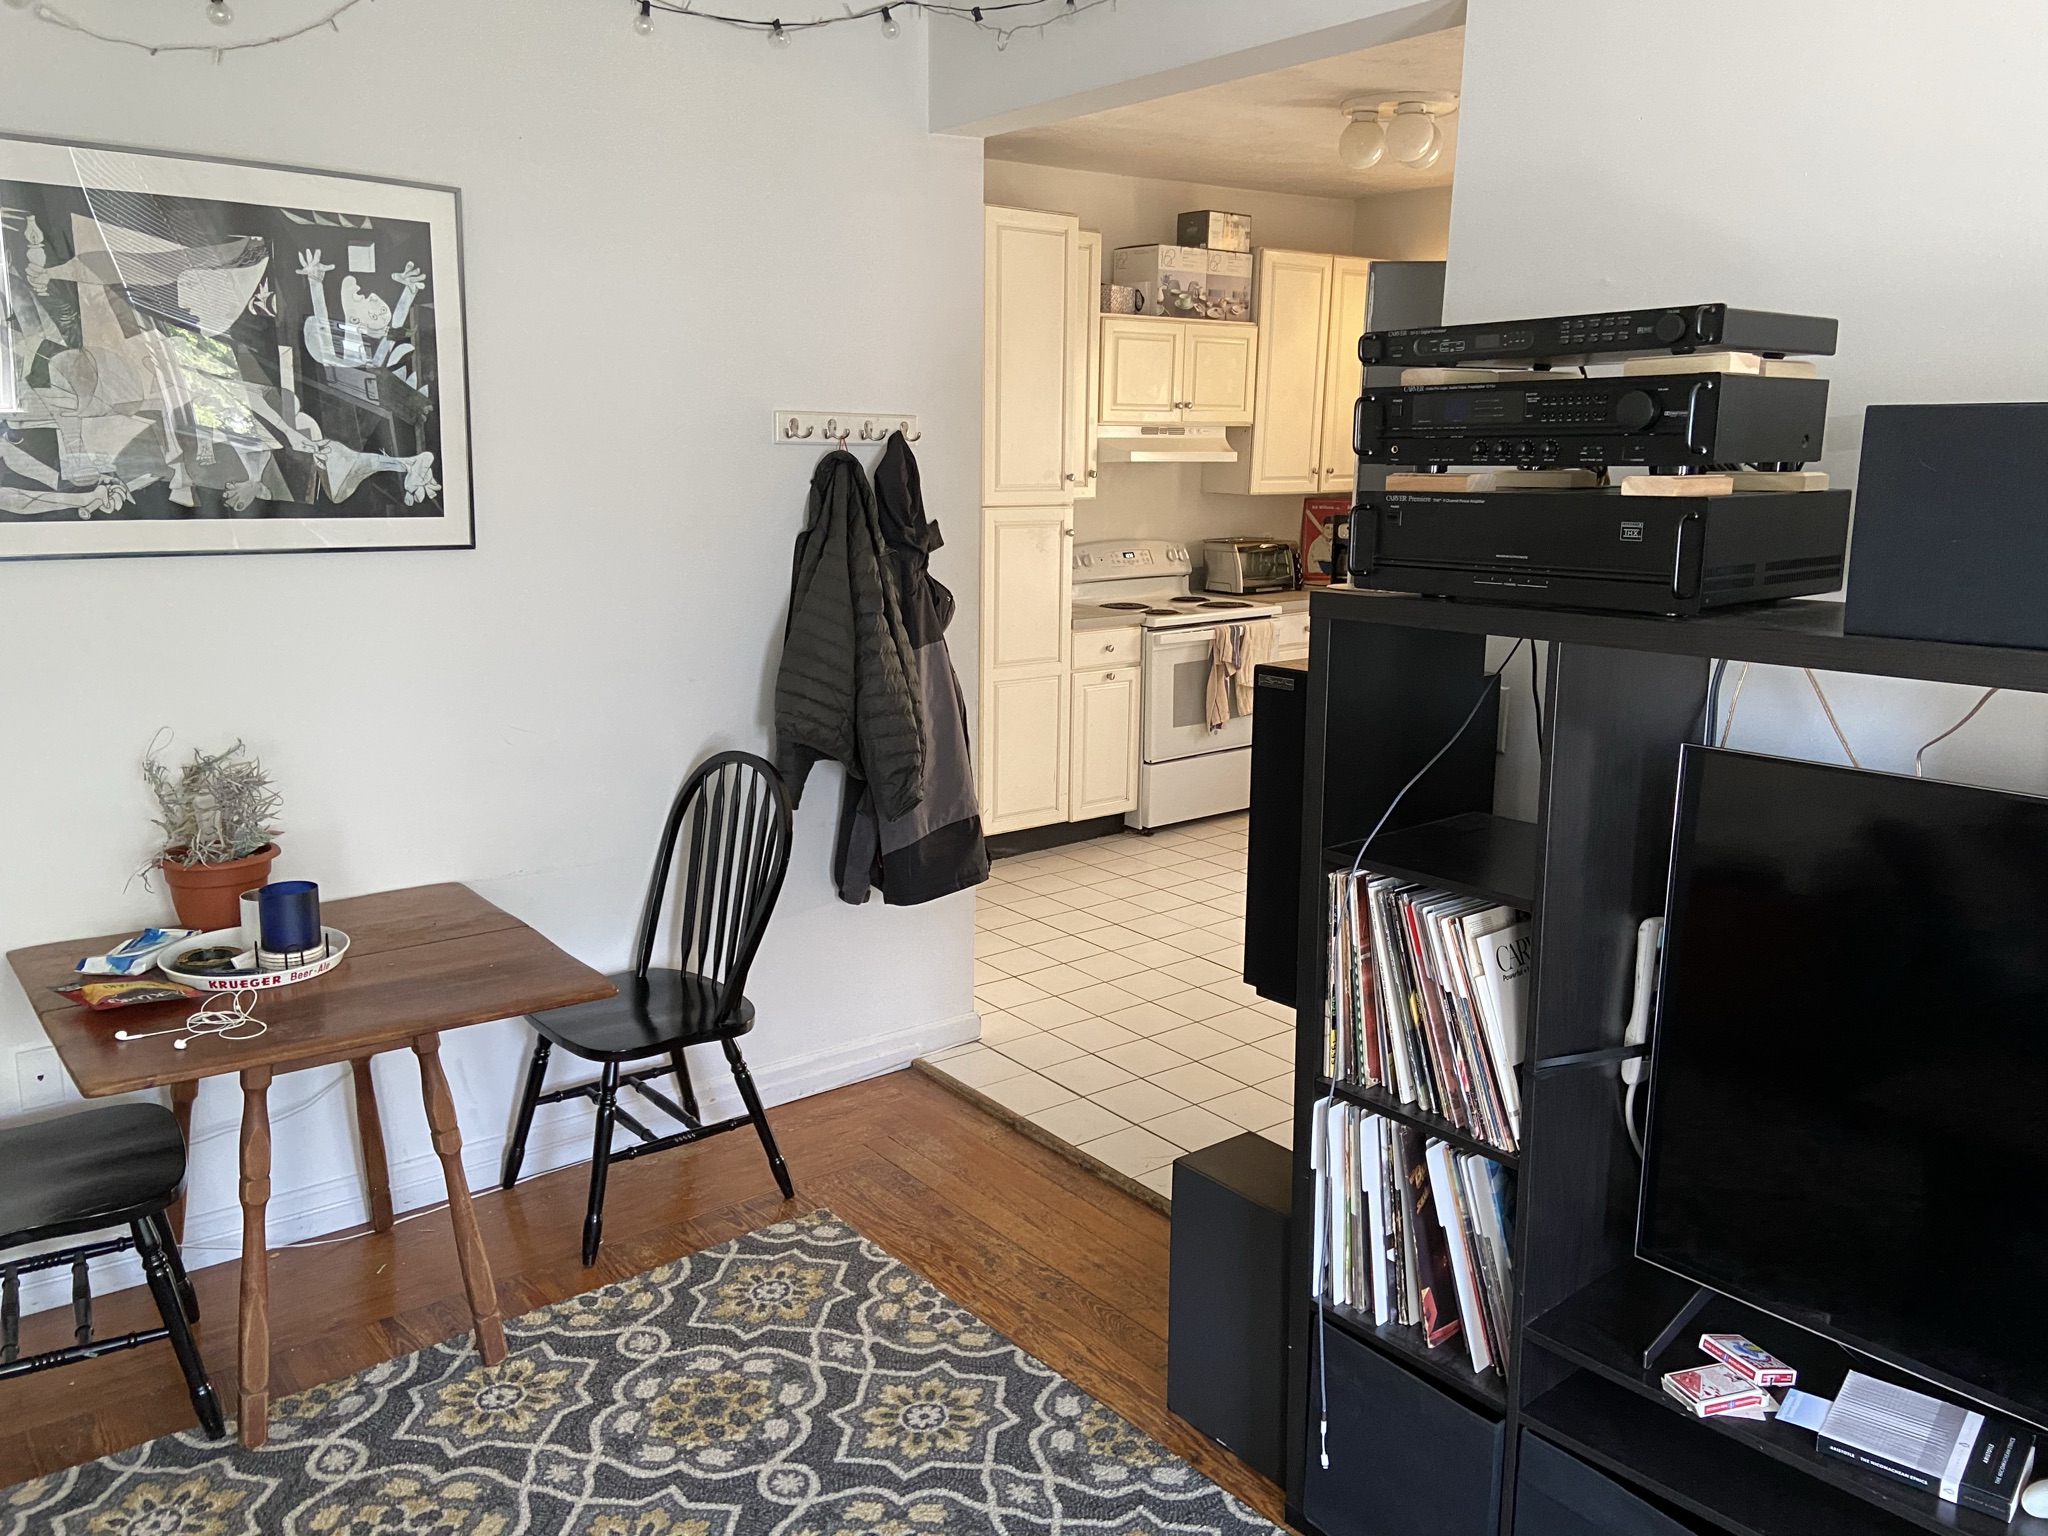 Photos of apartment on Haskell St.,Boston MA 02134